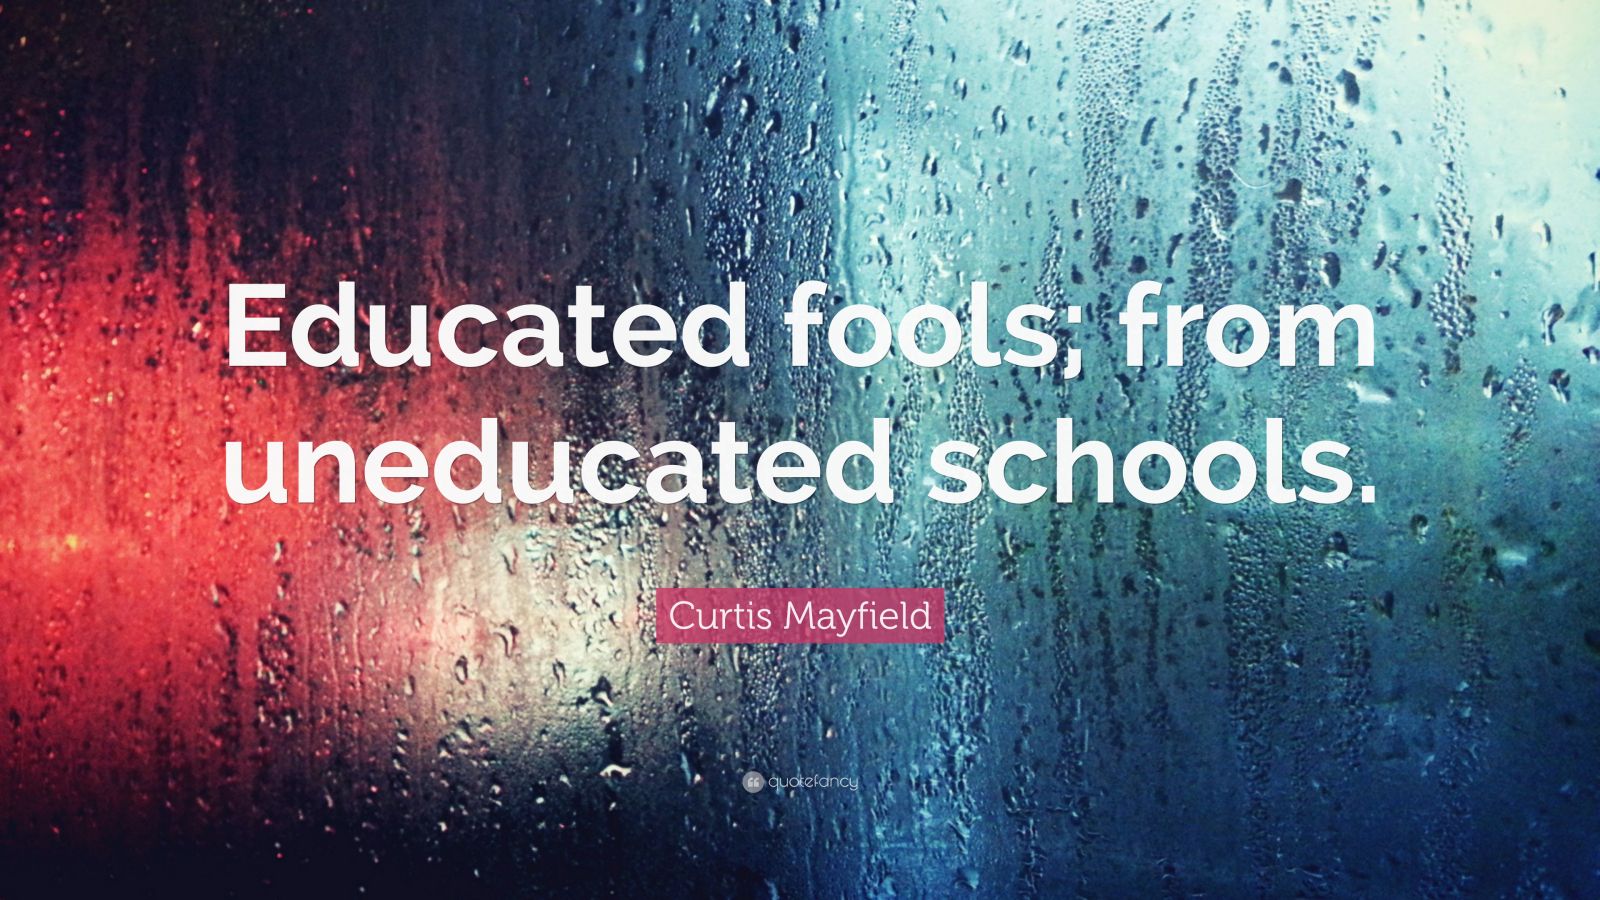 Curtis Mayfield Quote: “Educated fools; from uneducated schools.” (7